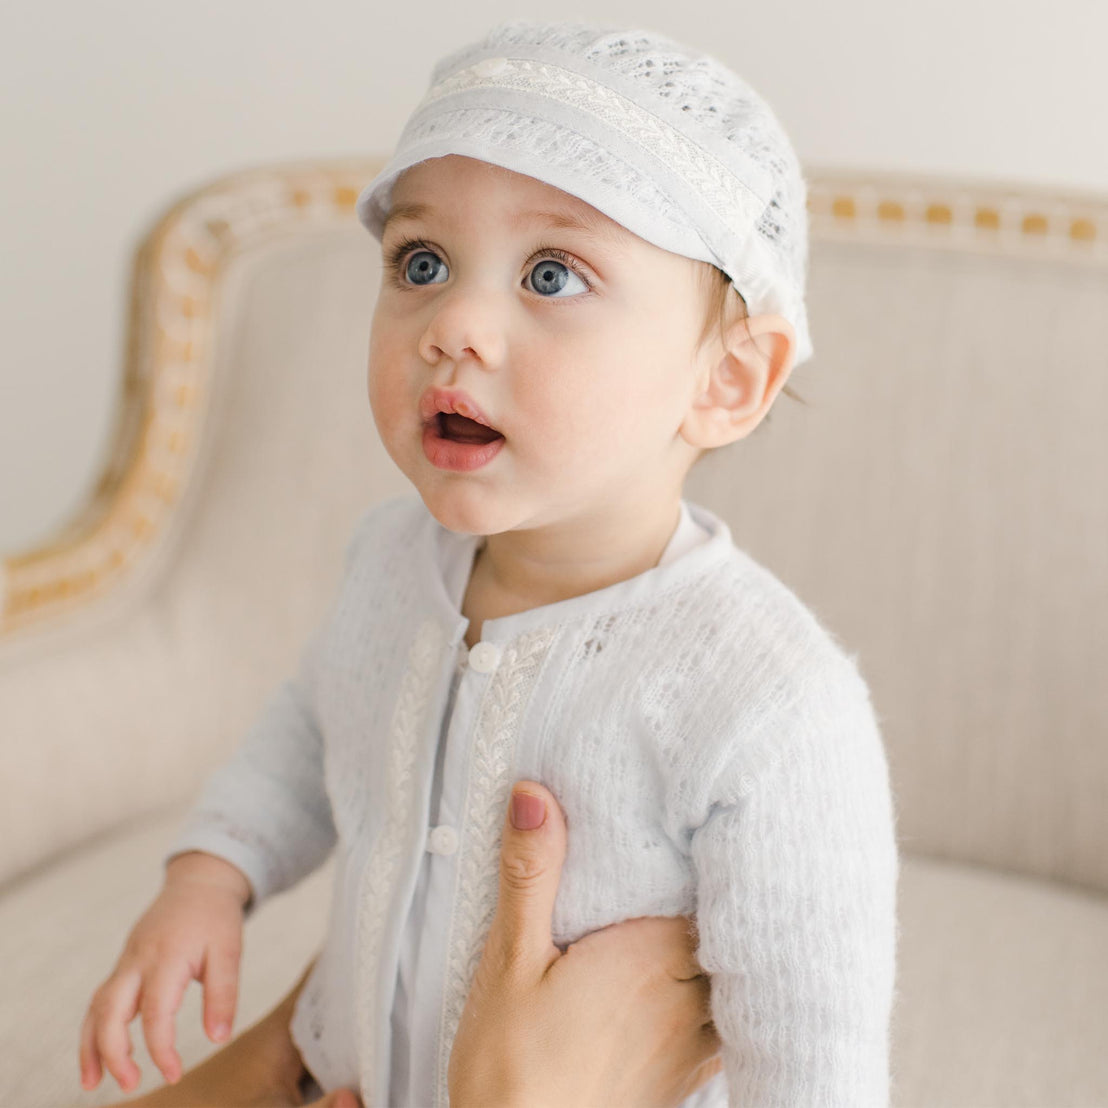 A baby boy wearing the Harrison Blue Knit Sweater and matching Blue Knit Hat